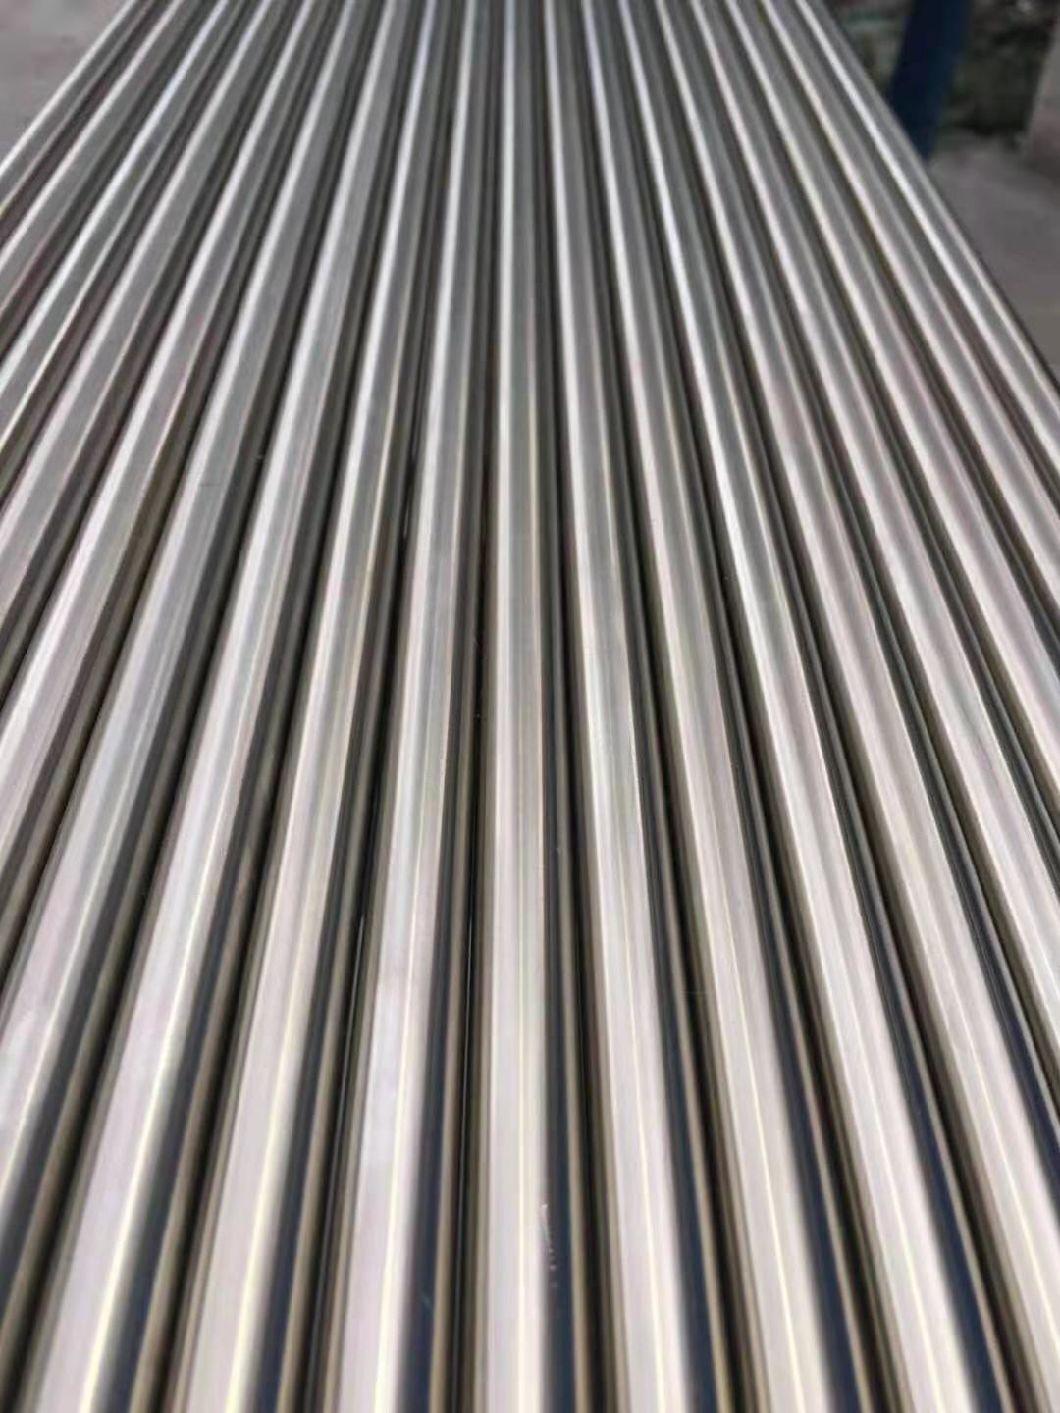 630 Stainless Steel Bar ASTM A564 Type 630 H1075 Round Bar